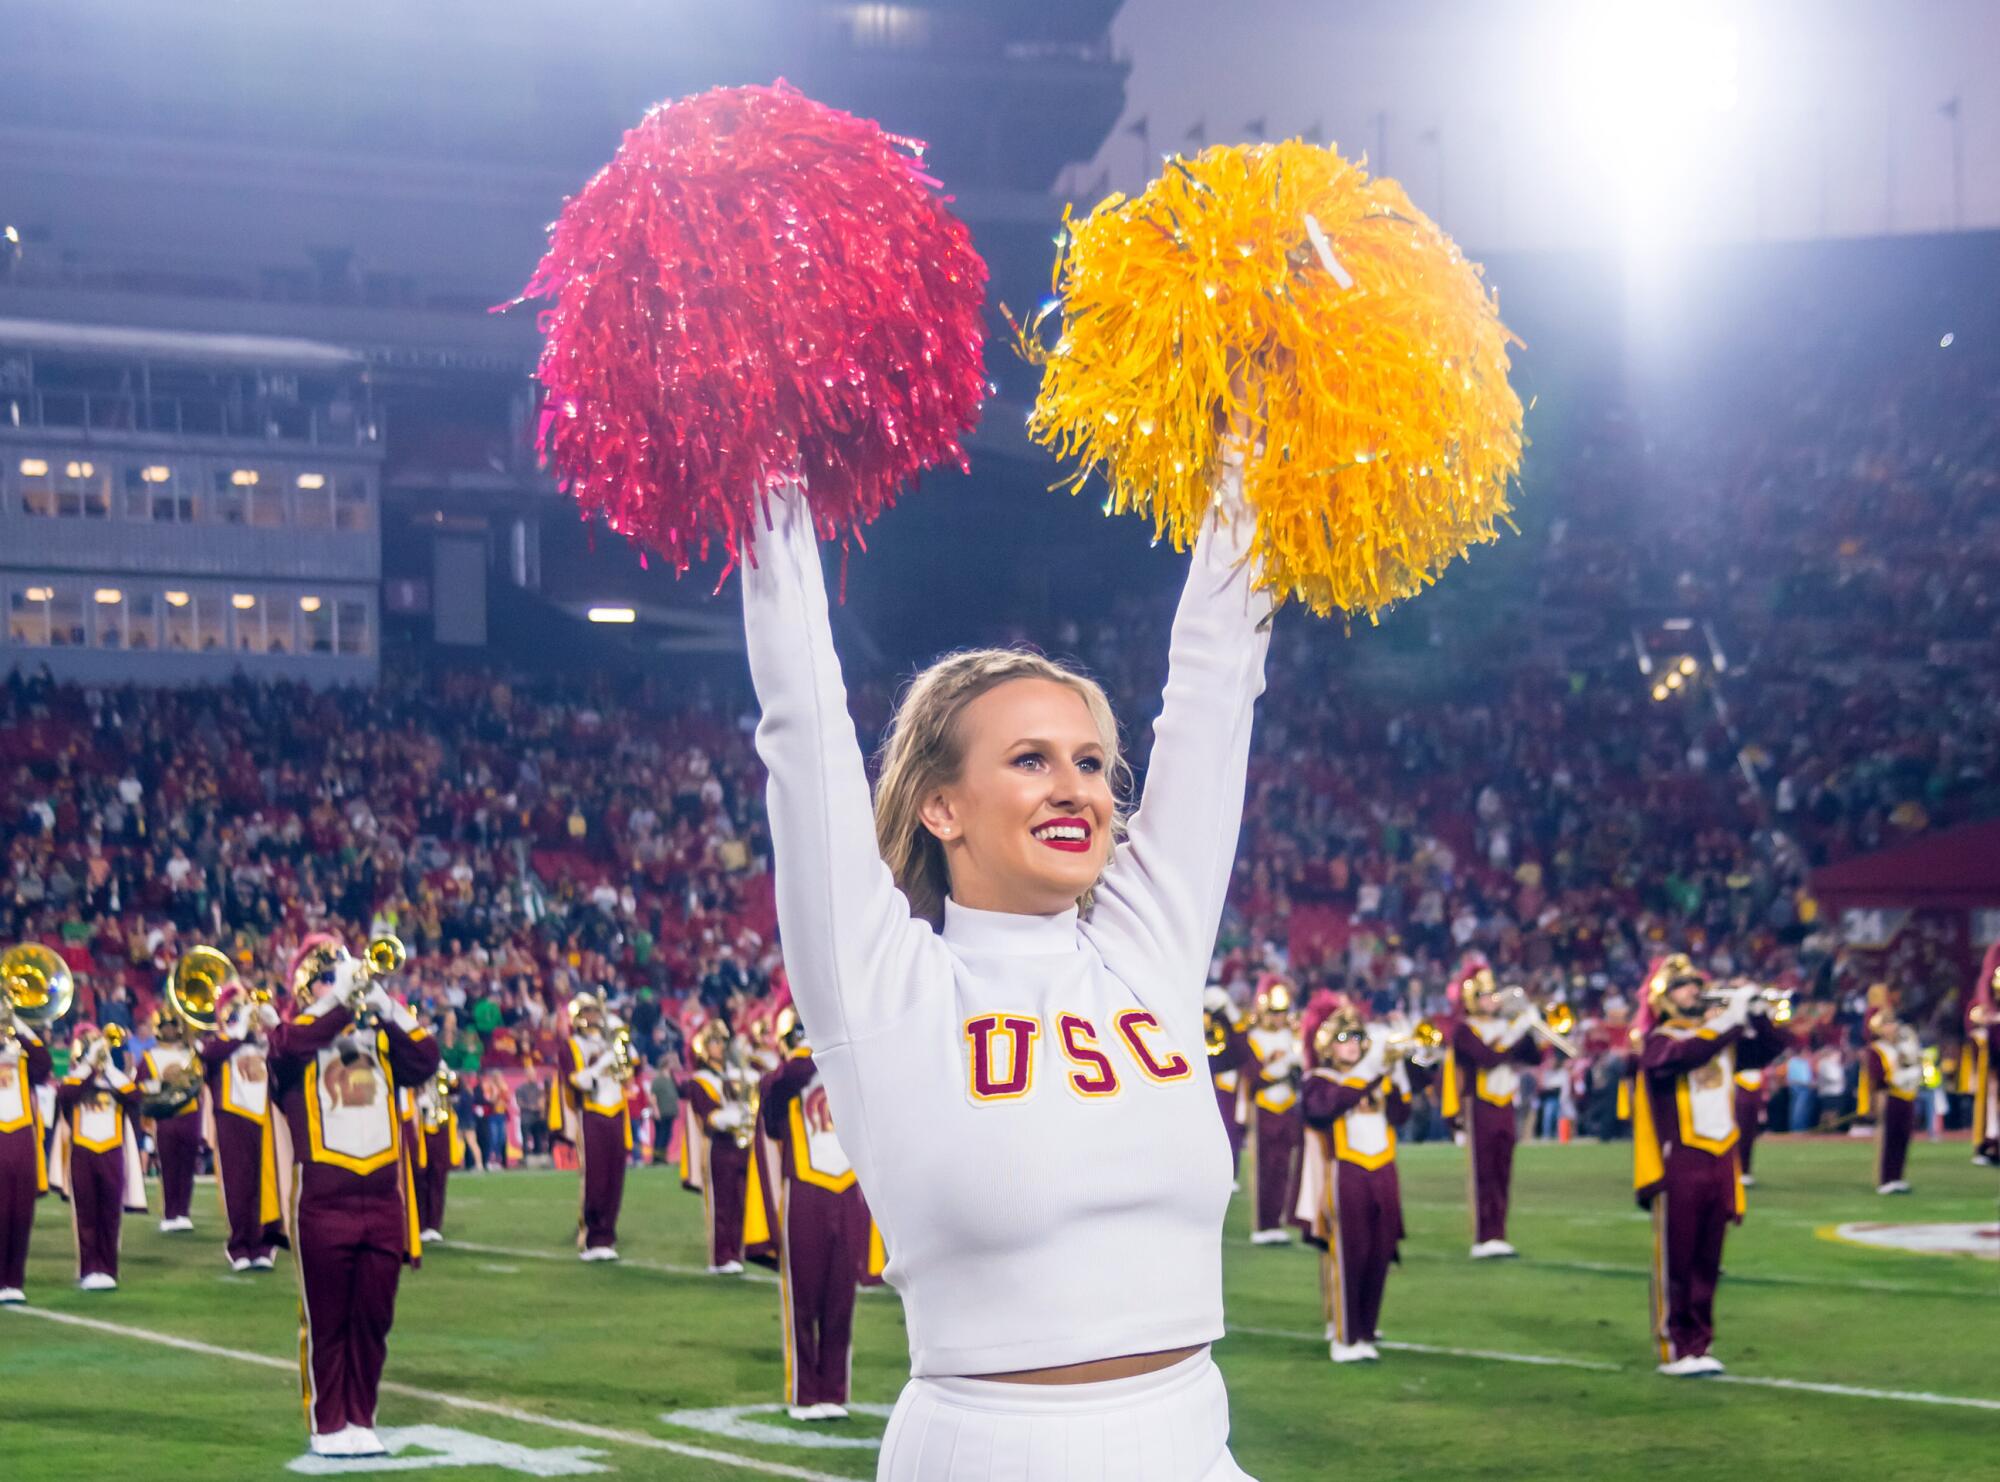 USC Song Girl Josie Bullen on the sideline as band plays on the field